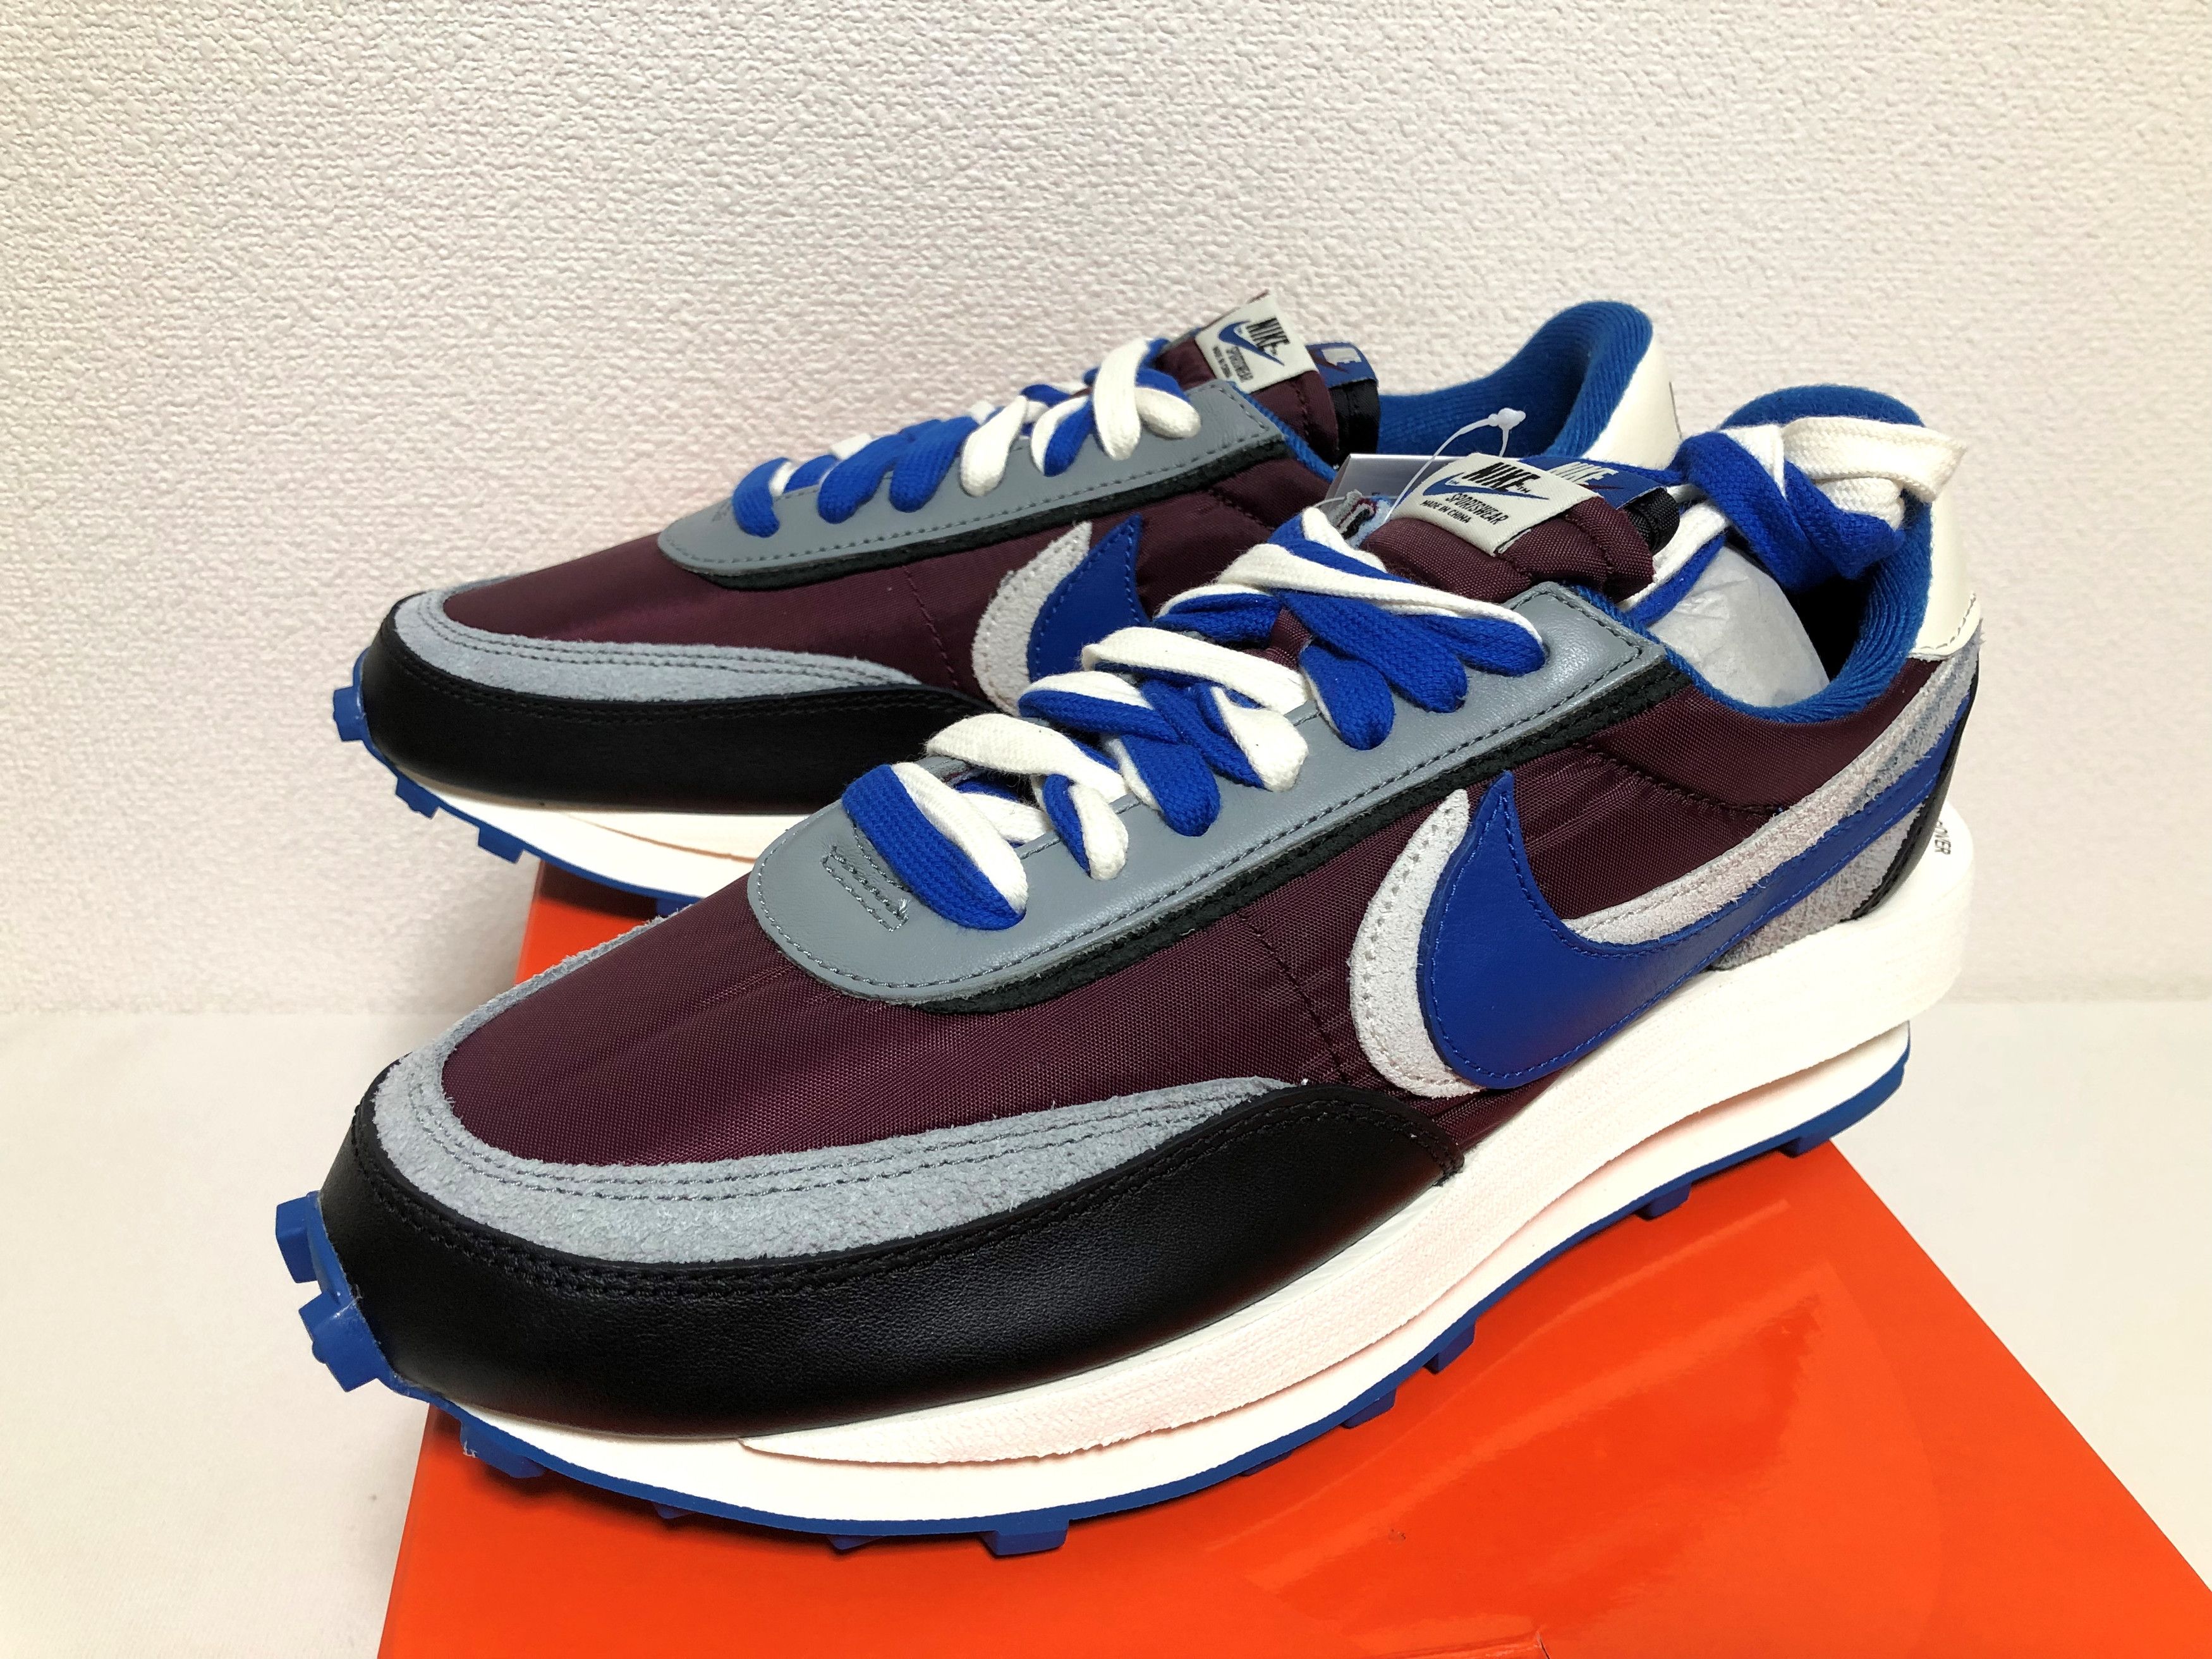 Undercover NIKE sacai undercover LD waffle Night Maroon Team Royal 10 |  Grailed